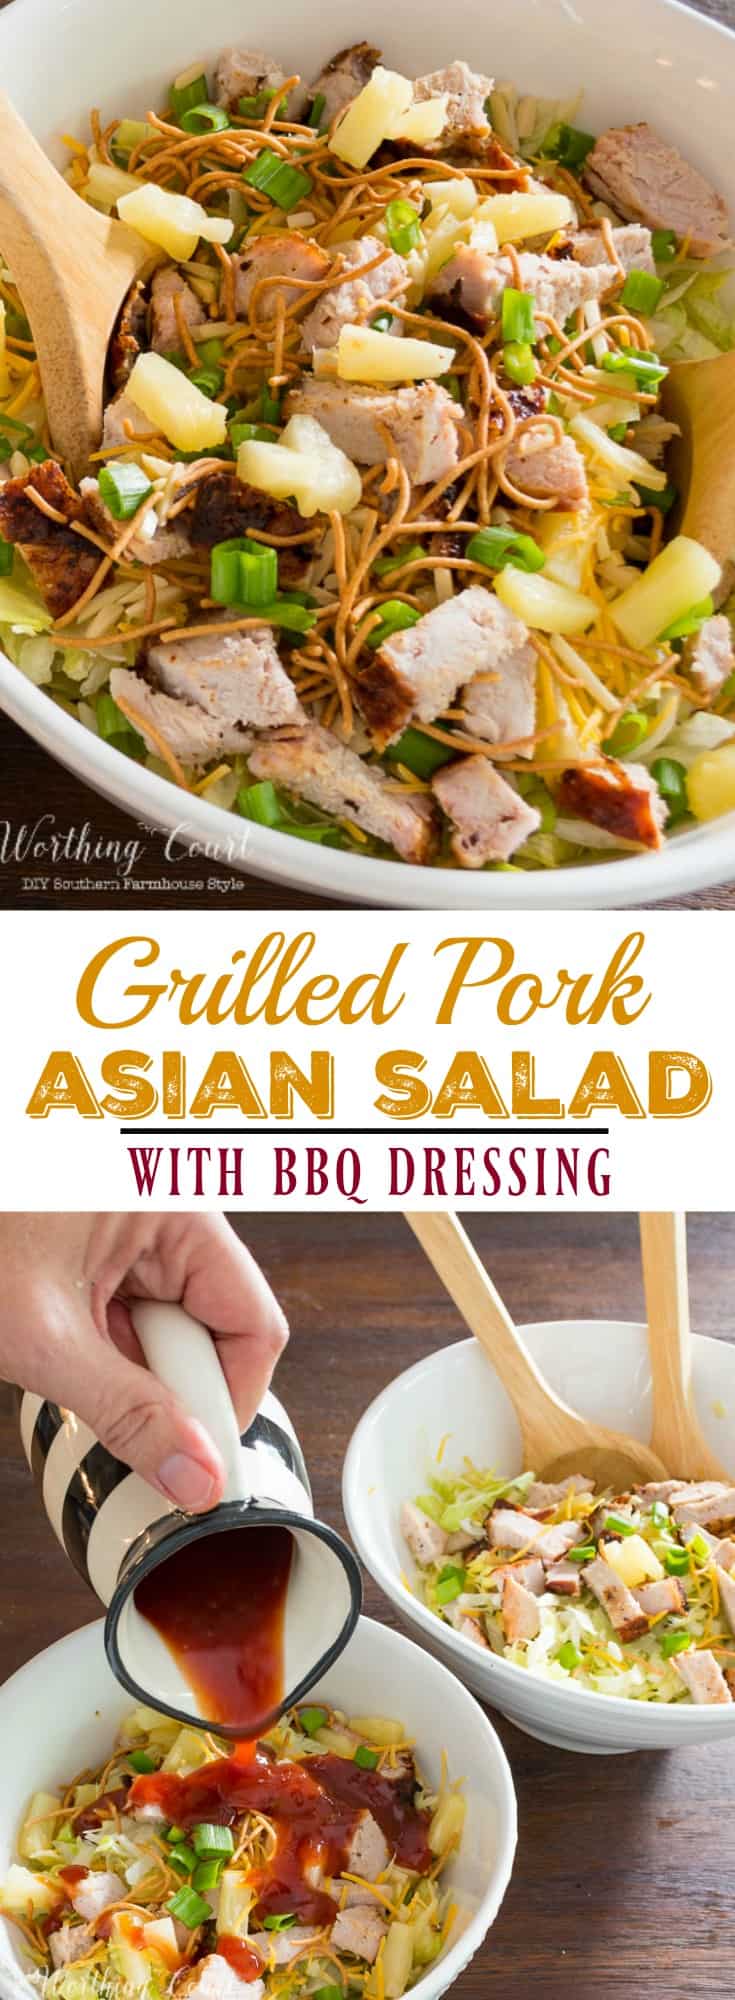 Yummy and Easy Grilled Pork Asian Salad Recipe with BBQ Dressing graphic.